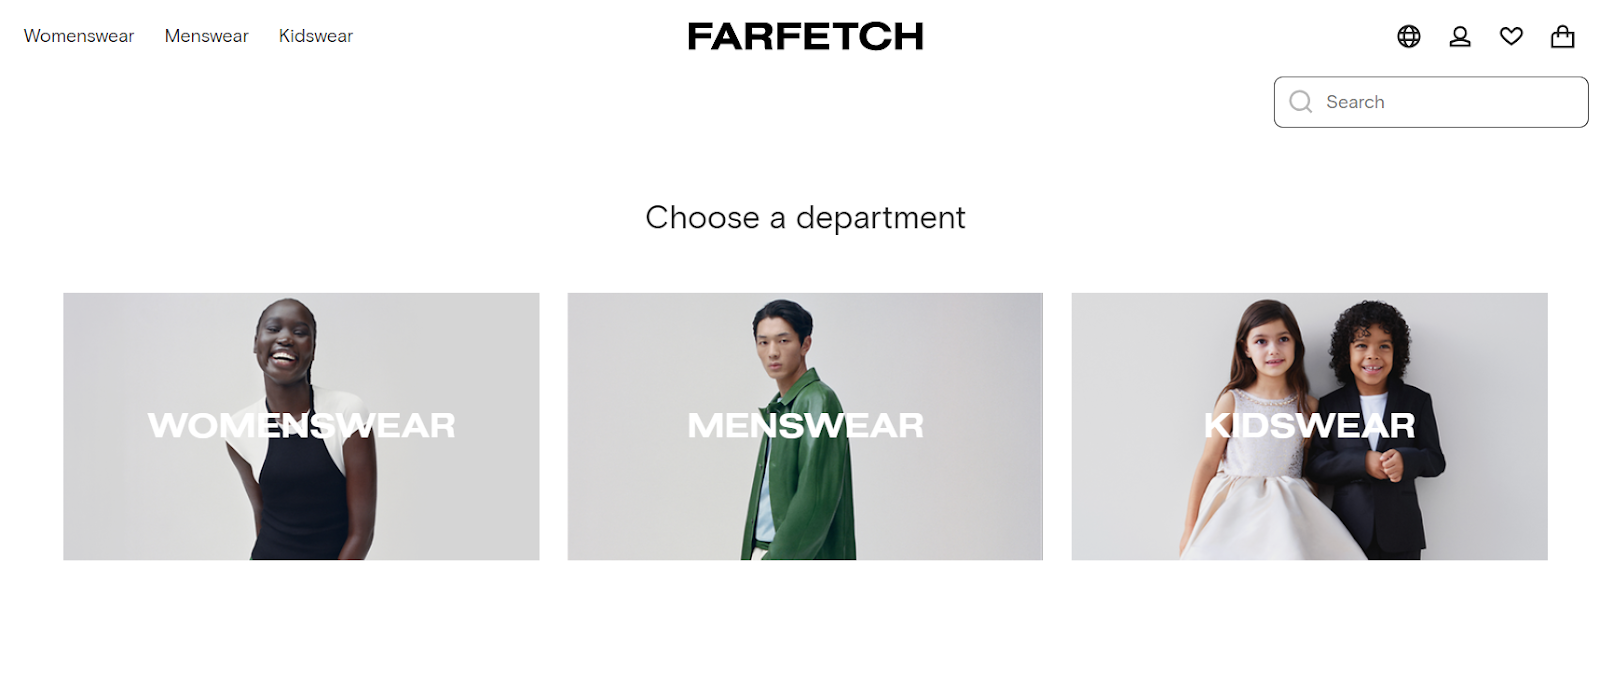 FARFETCH makes its brand sound better with the help of AI